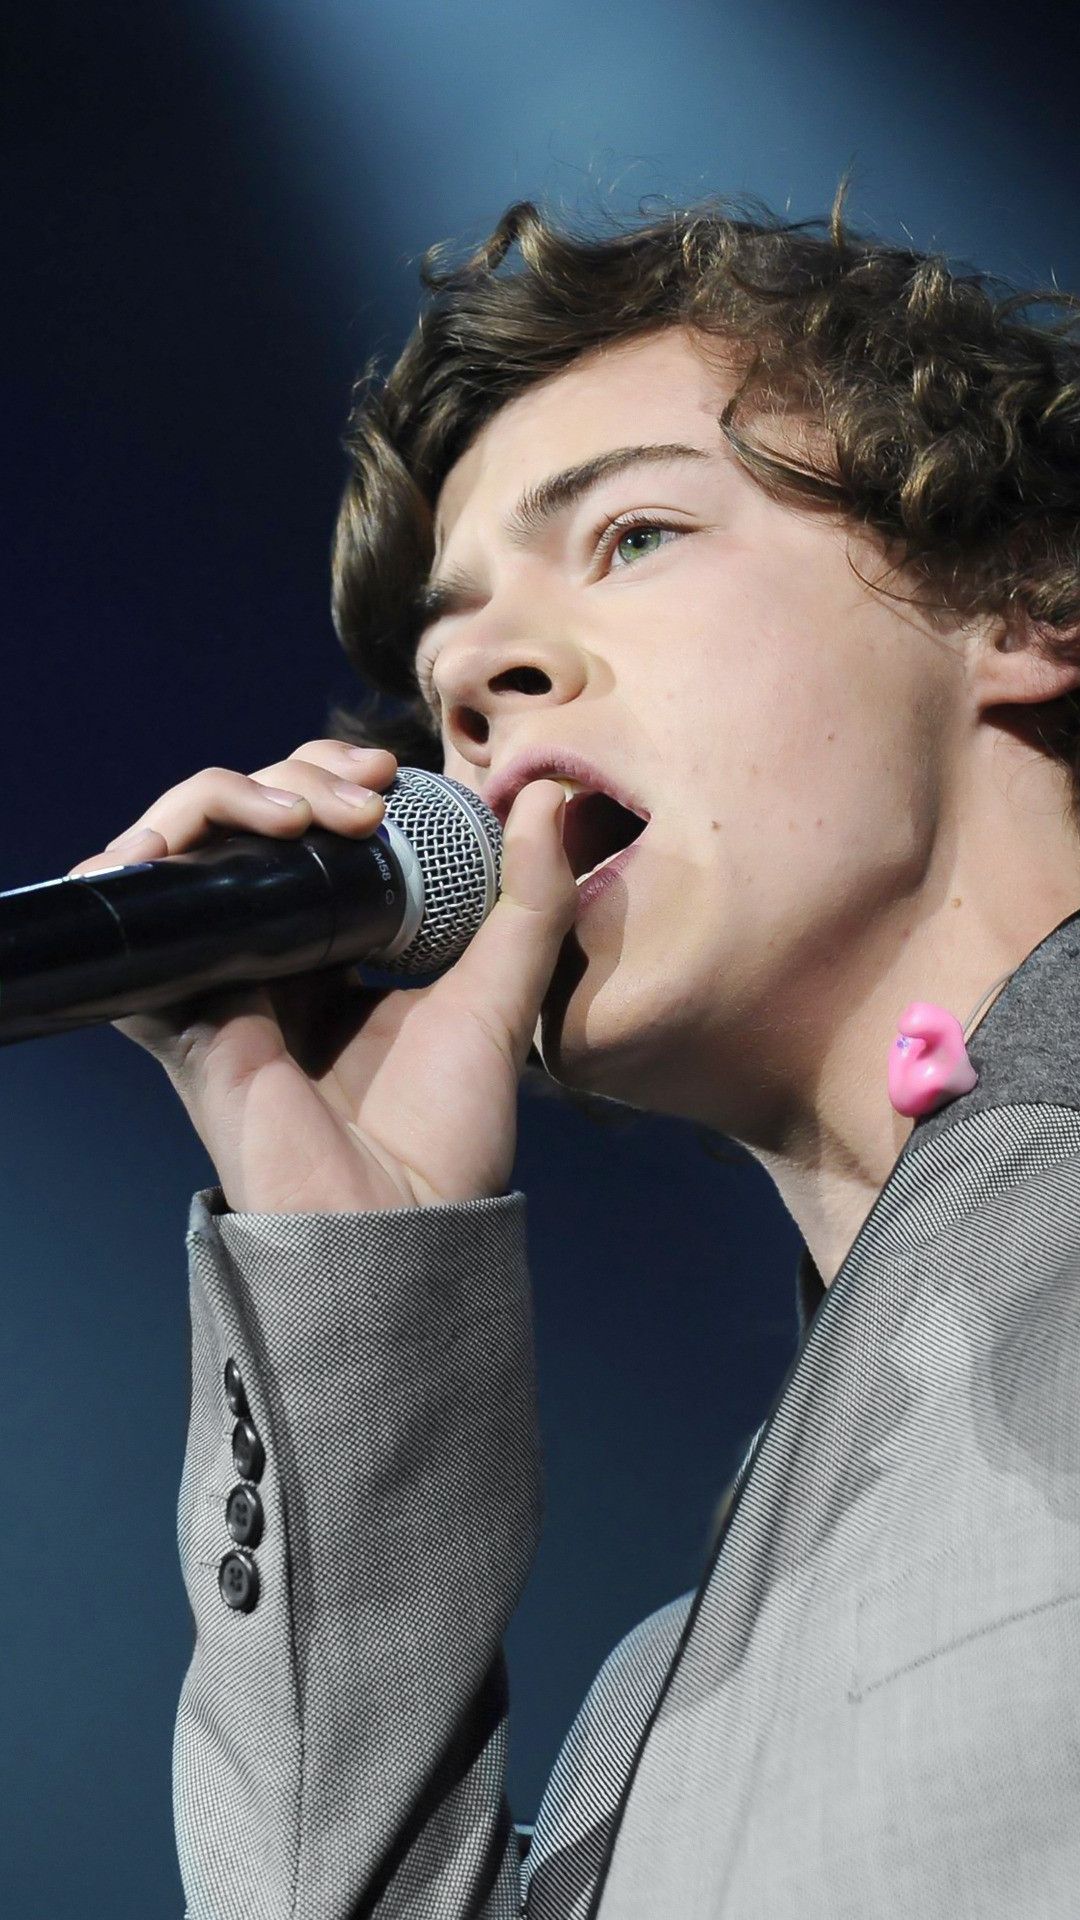 A young man singing into microphone - Harry Styles